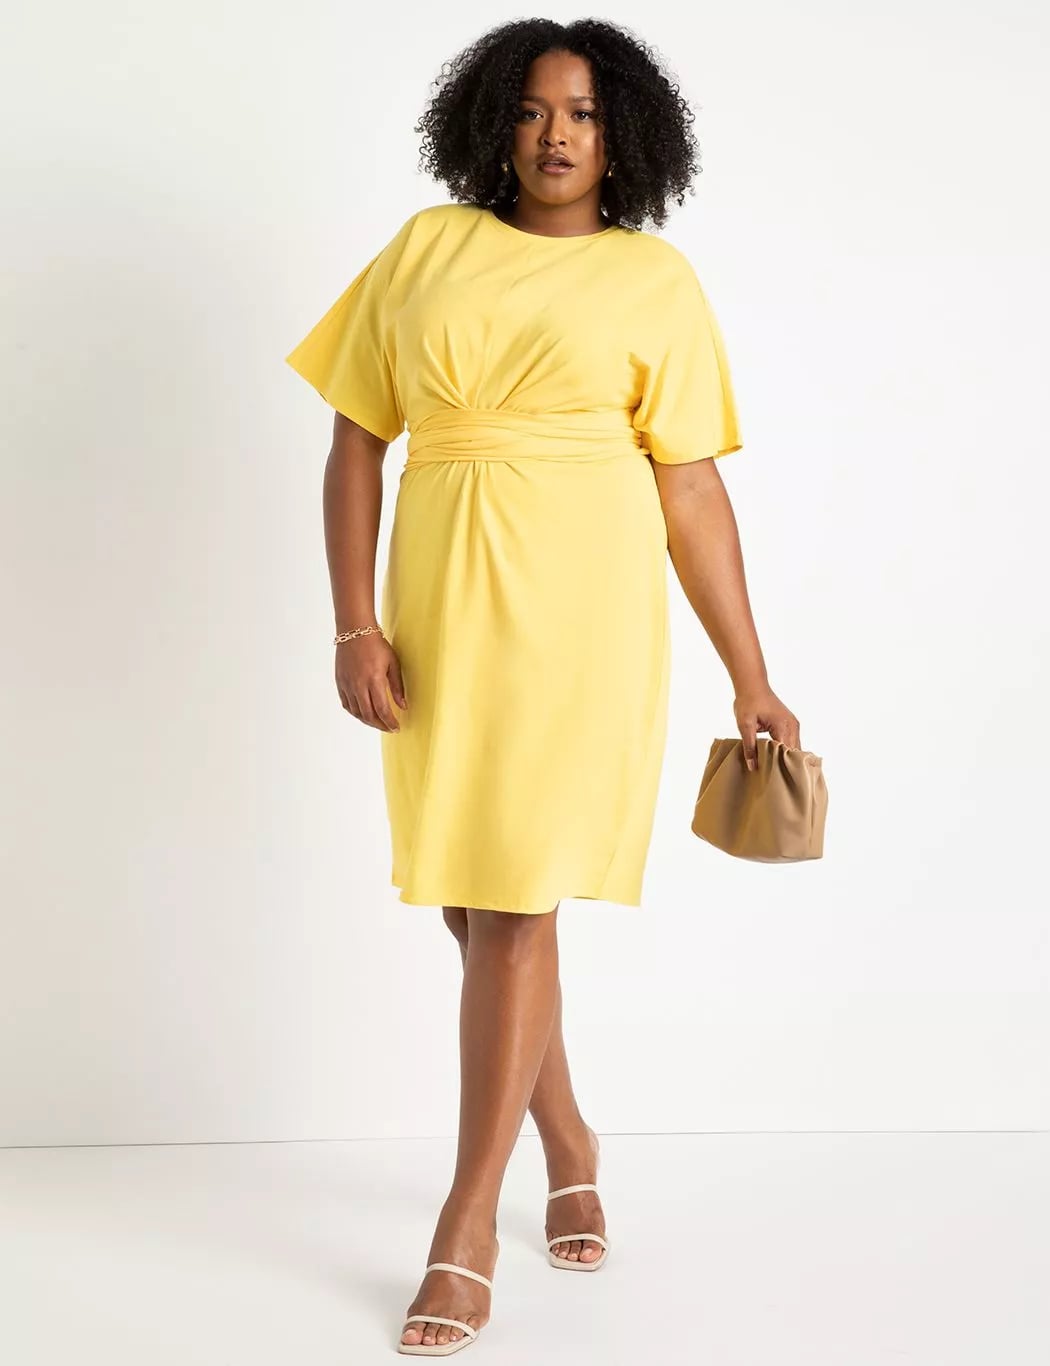 Office Wear Plus Size For Girls, Befitting and Affordable